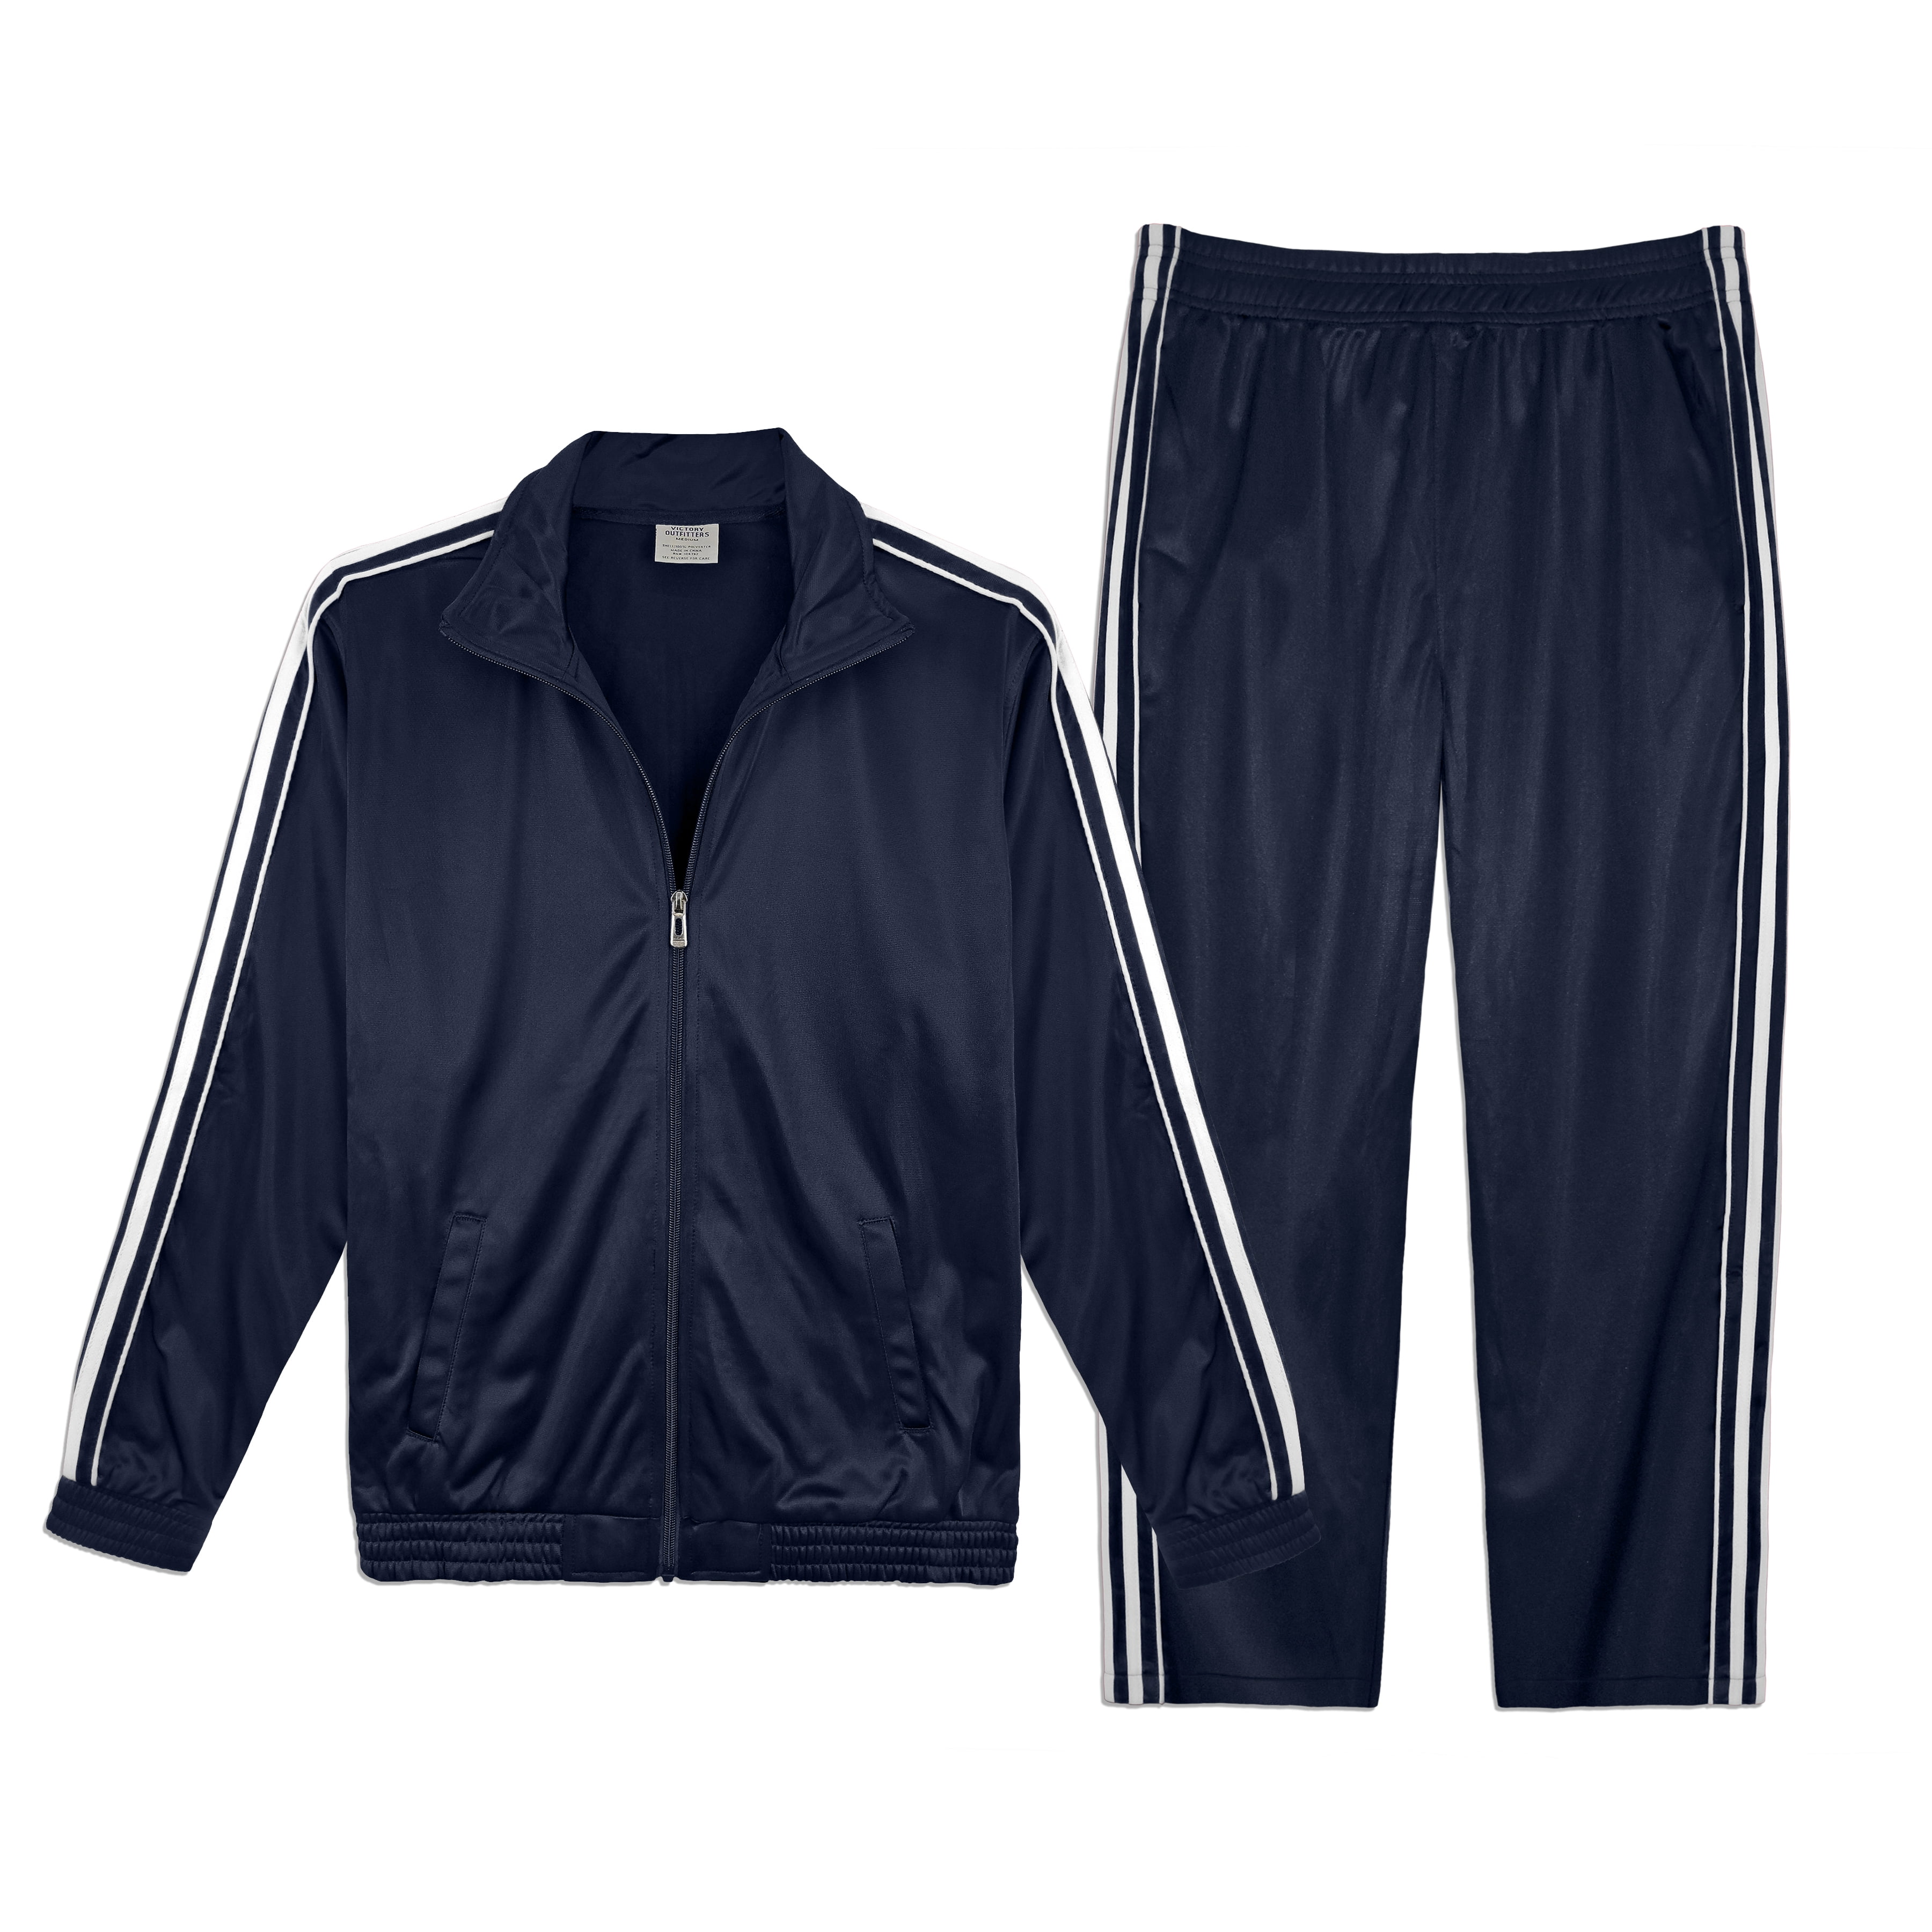 Victory Outfitters Men's Athletic Tricot Track Jacket and Matching Pants  Set - NVY/WHT - L 